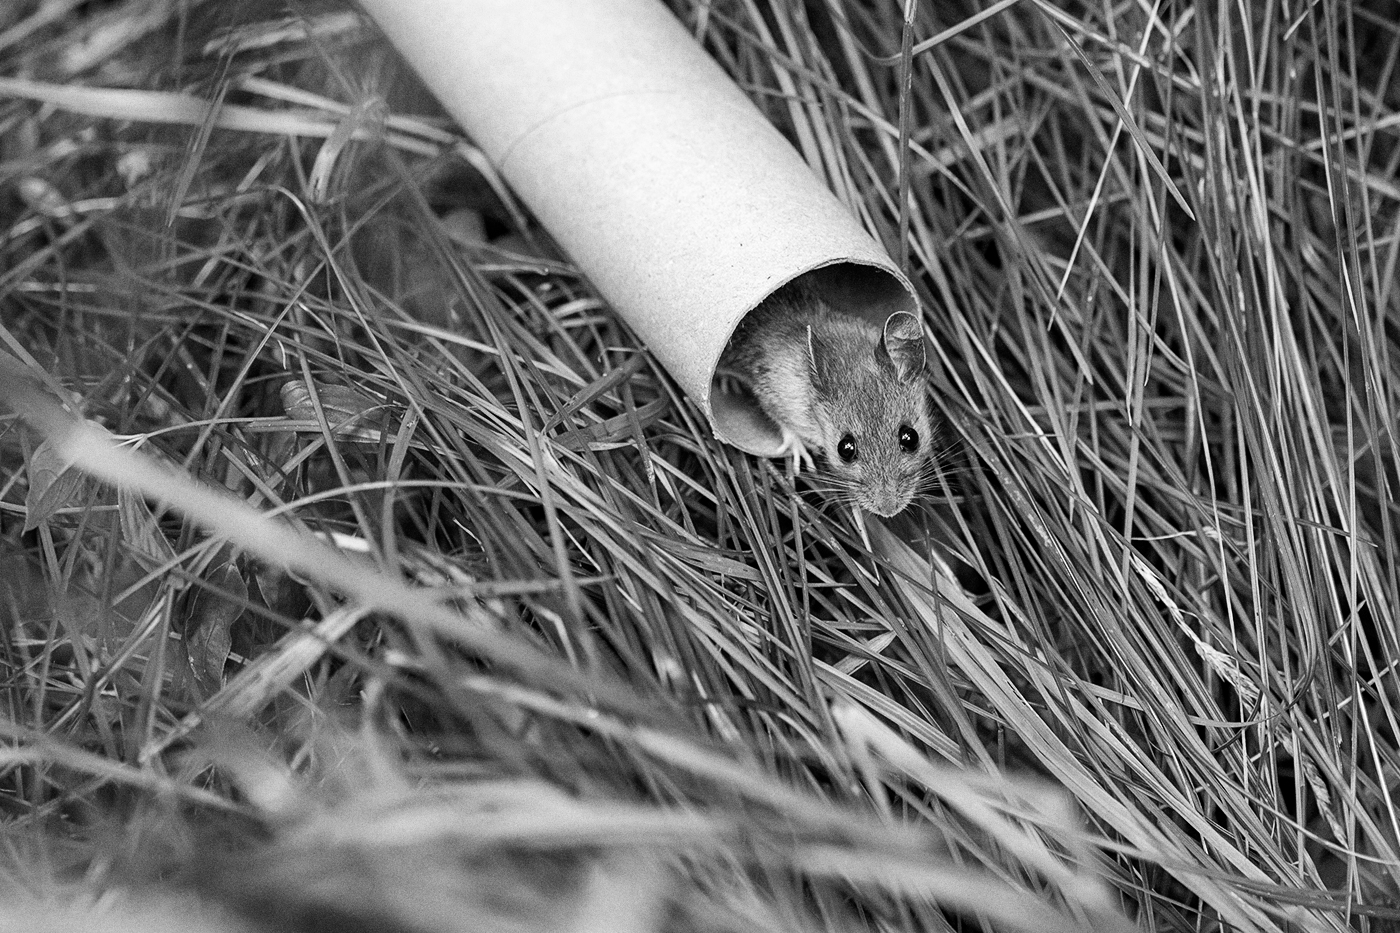 A field mouse in a cardboard tube.